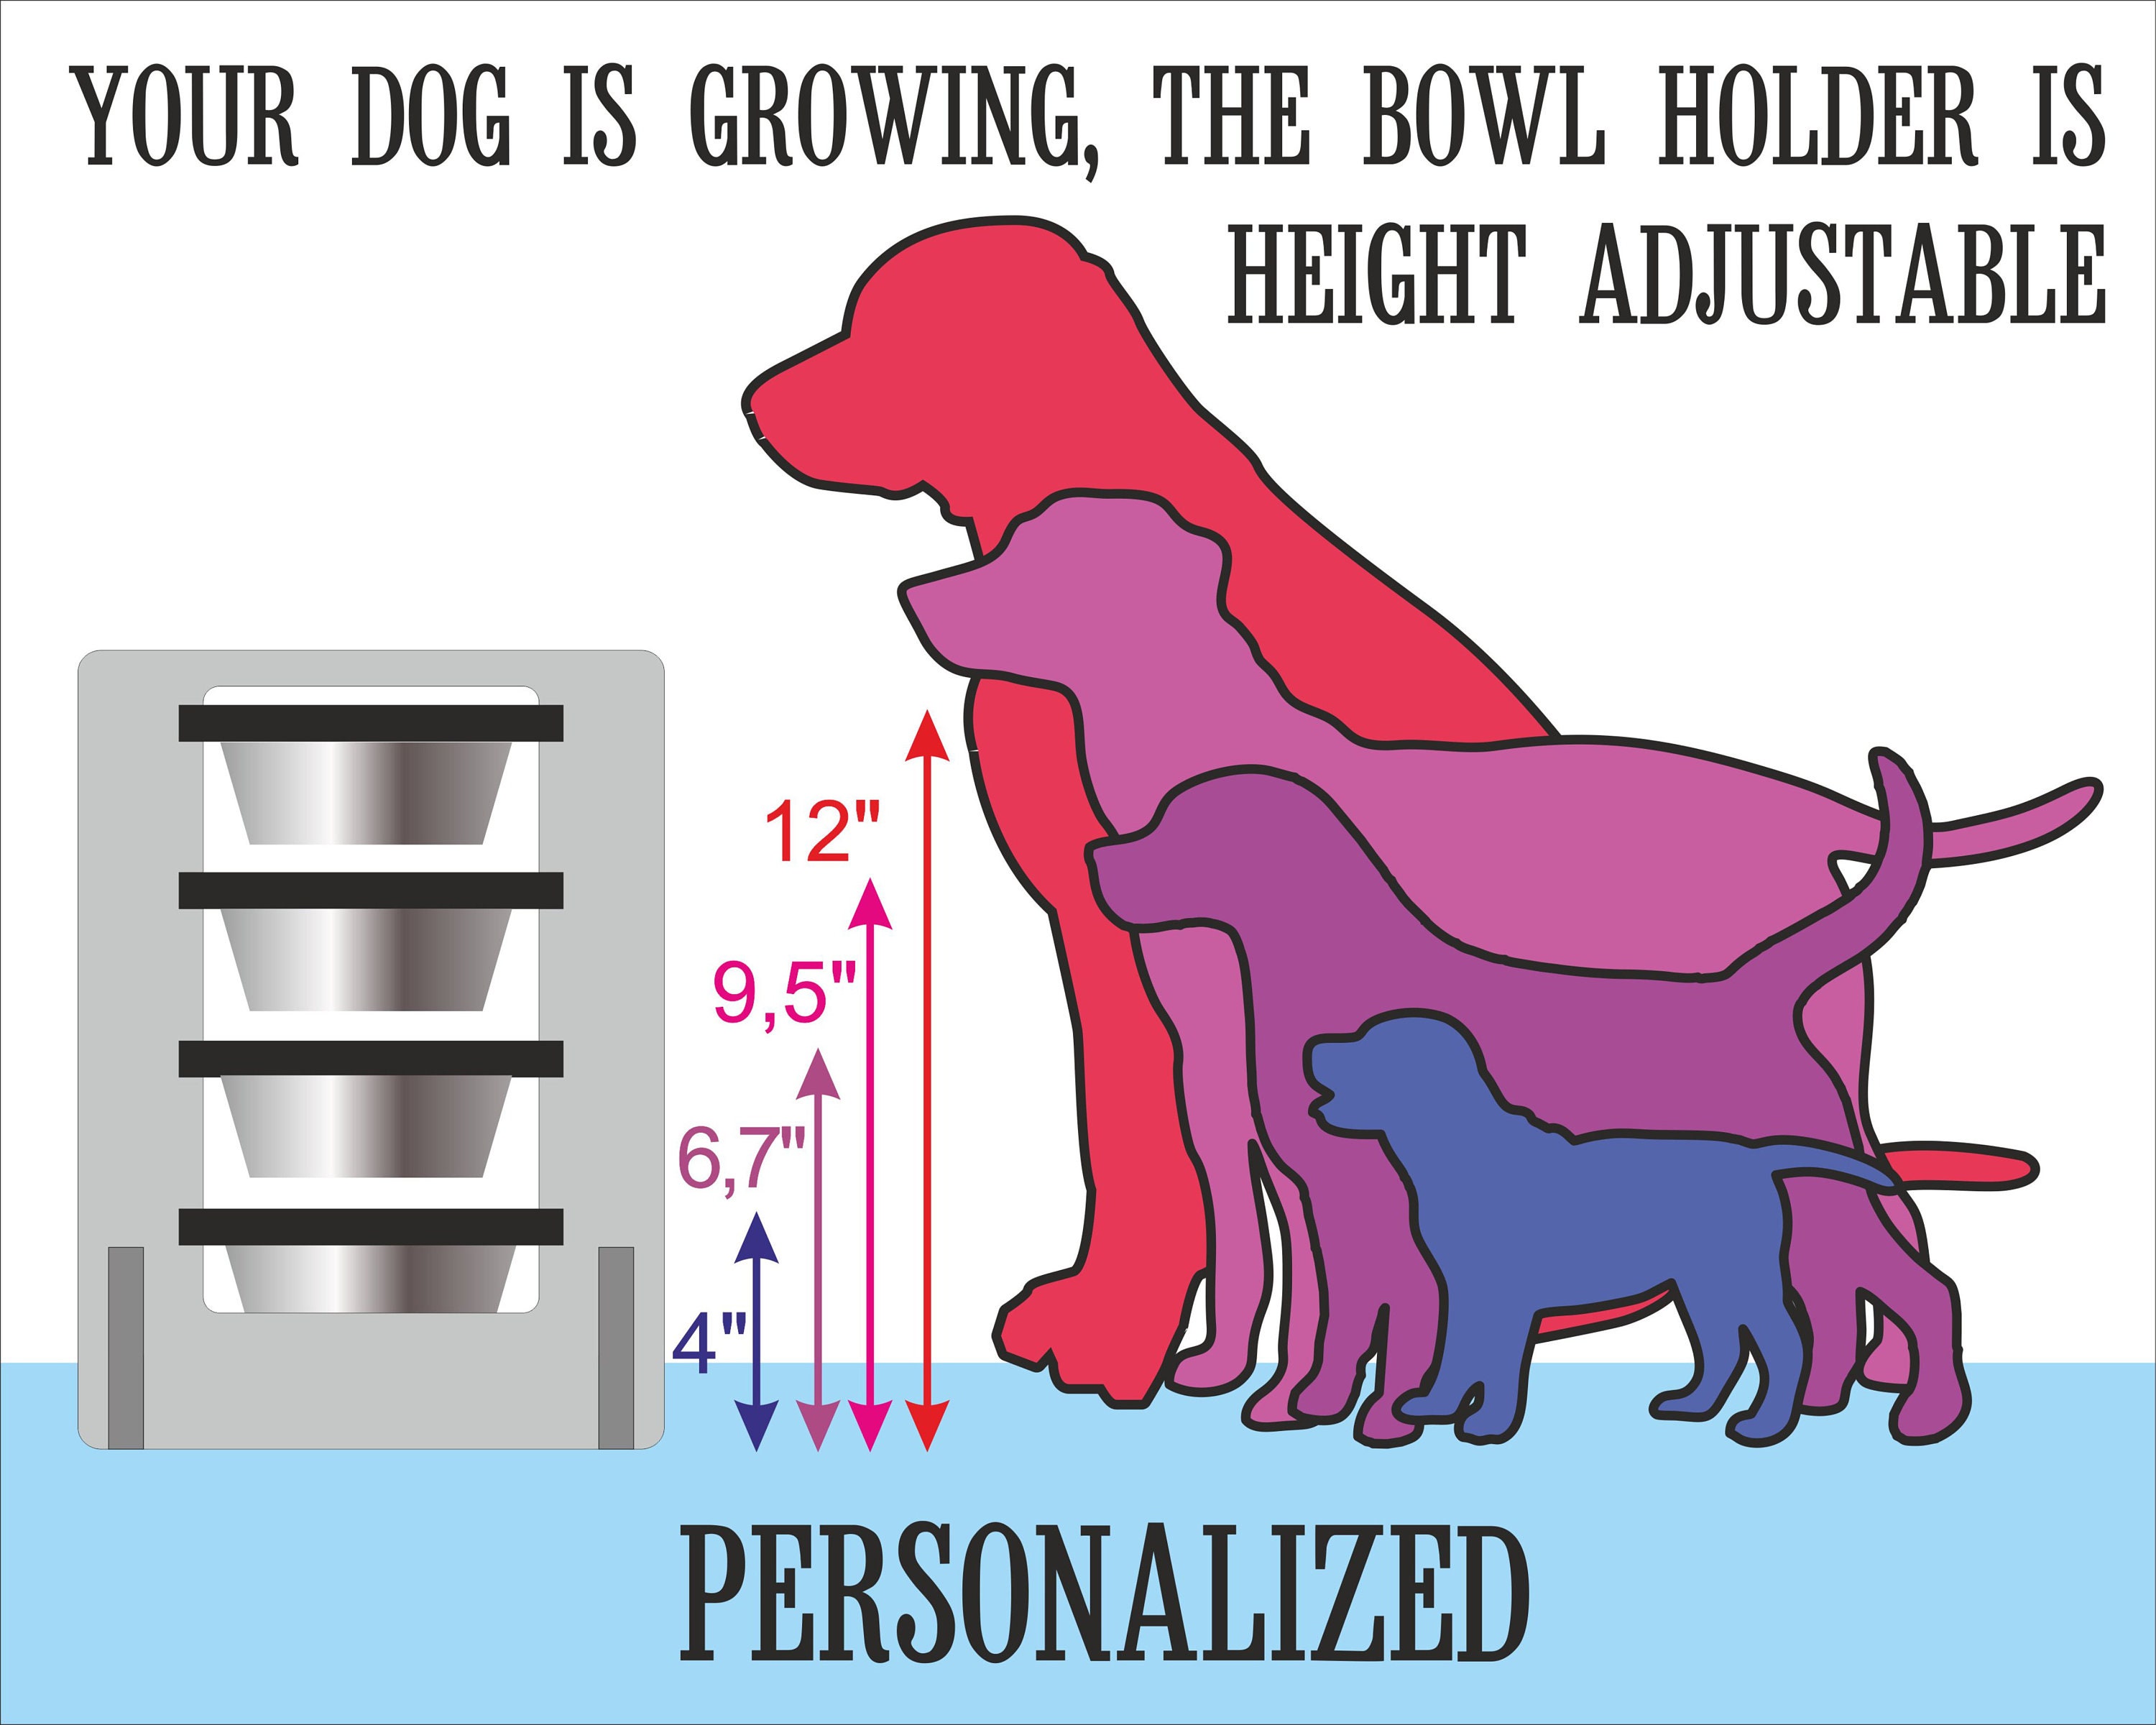 Raised Dog Bowl for Large Dogs Elevated Upgrated 6-7 Heights Adjustable